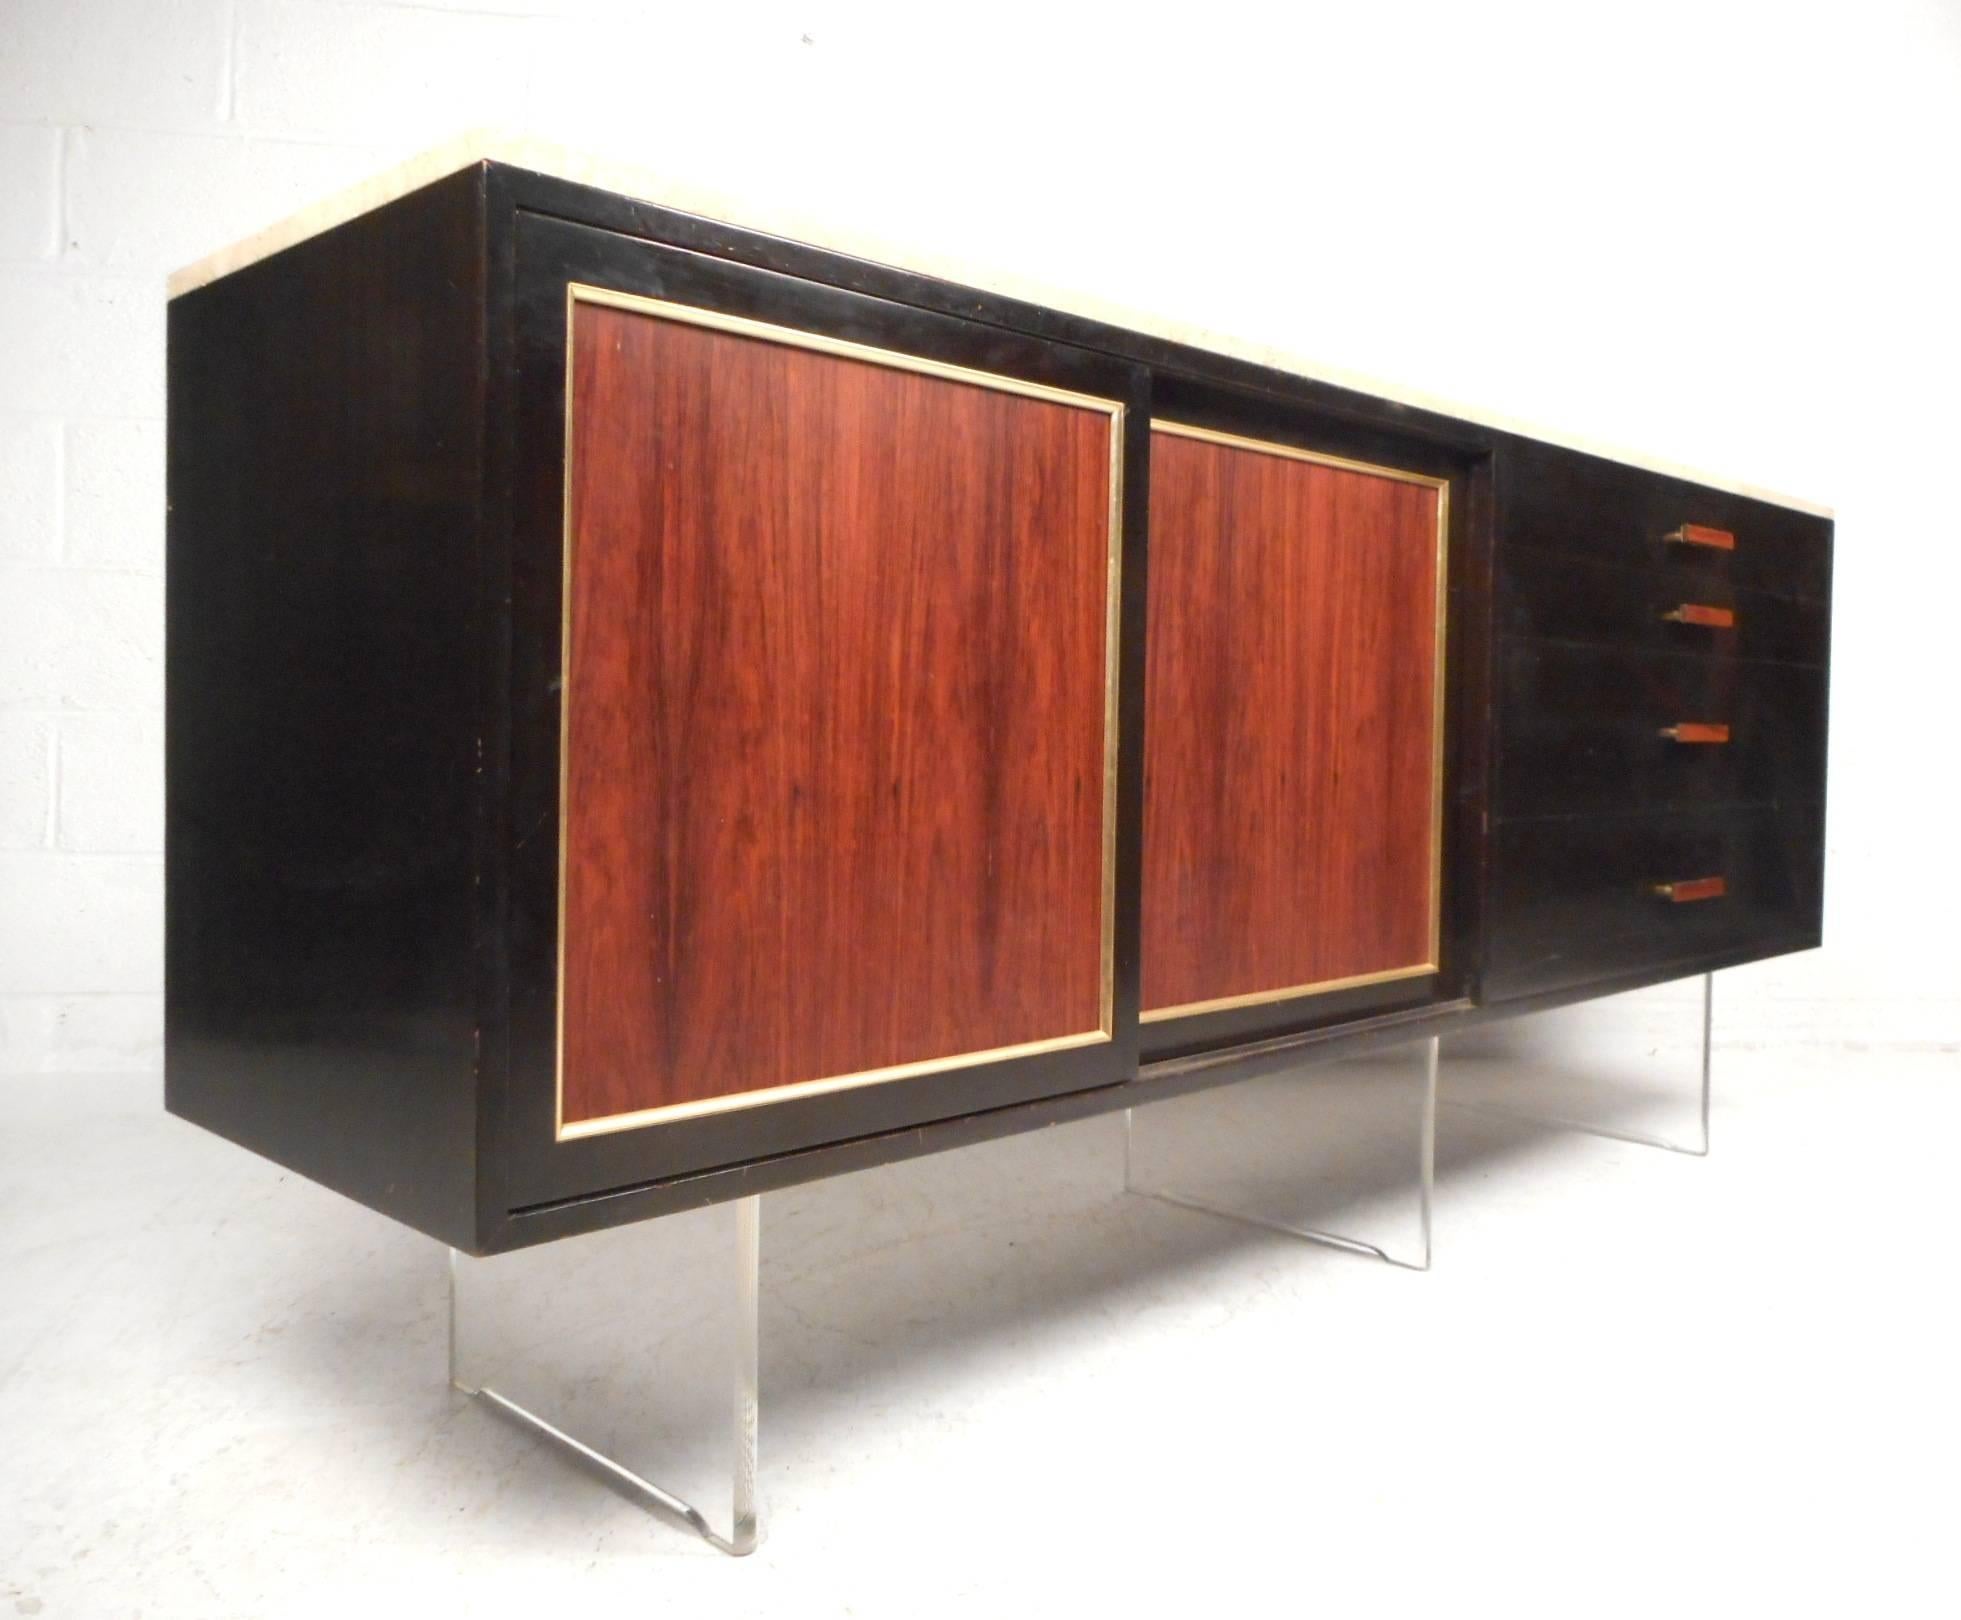 This handsome vintage modern sideboard features plenty of room for storage within its hefty drawers and large hidden compartment with a shelf. Sleek two-tone design with a sturdy Lucite base, unusual wood front drawer pulls, and an elegant ebonized